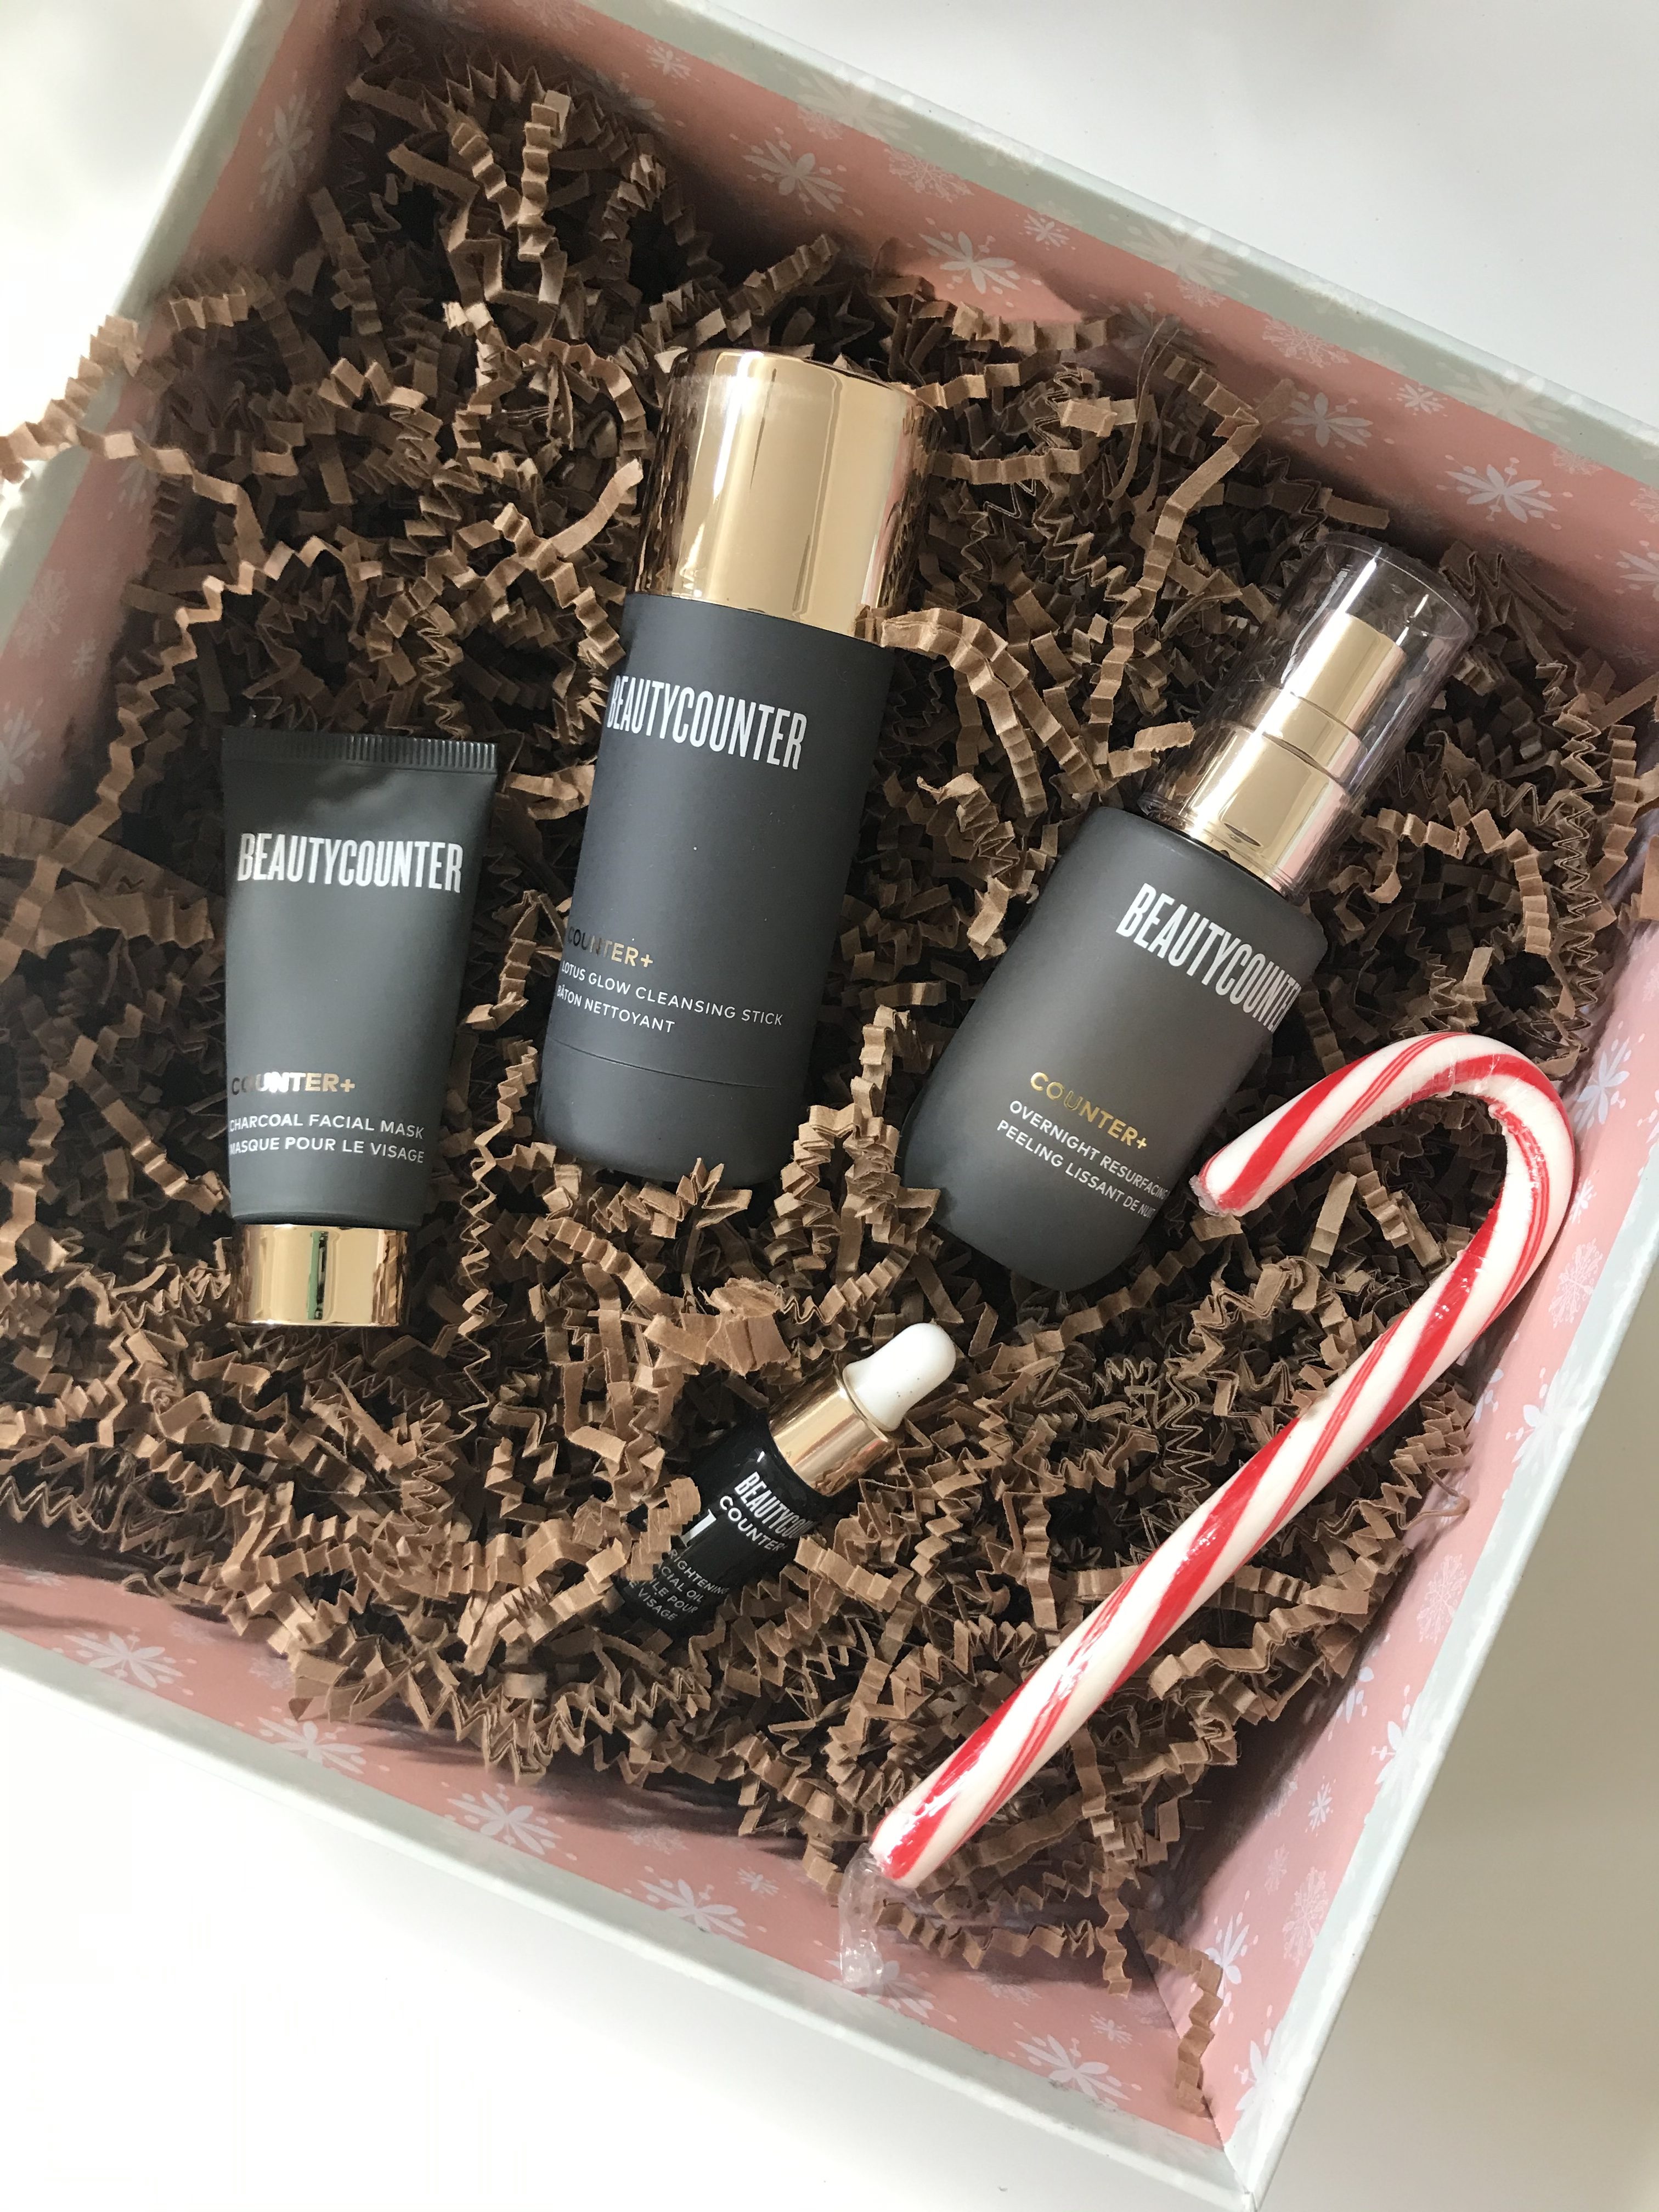 Beautycounter holiday collection. Skincare gifts for her